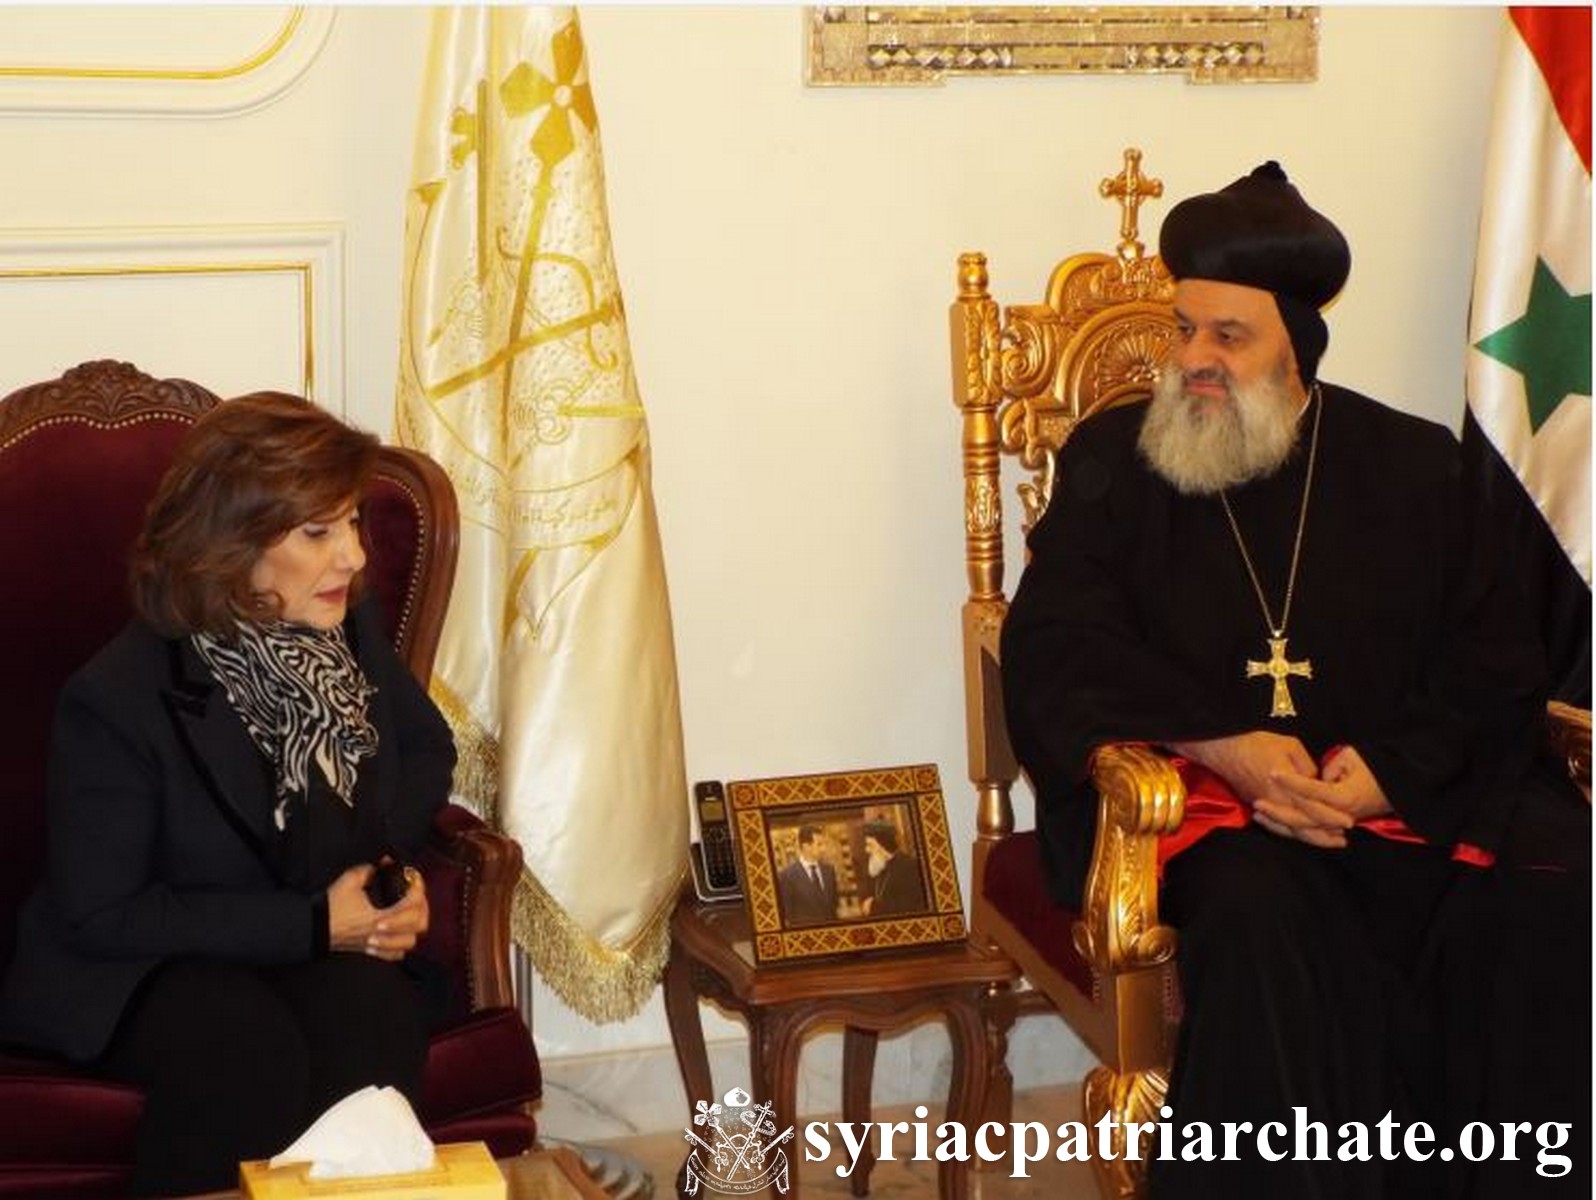 Patriarch Ignatius Apahrem II Meets Political and Media Adviser to the Syrian Presidency Dr. Bouthaina Shaaban